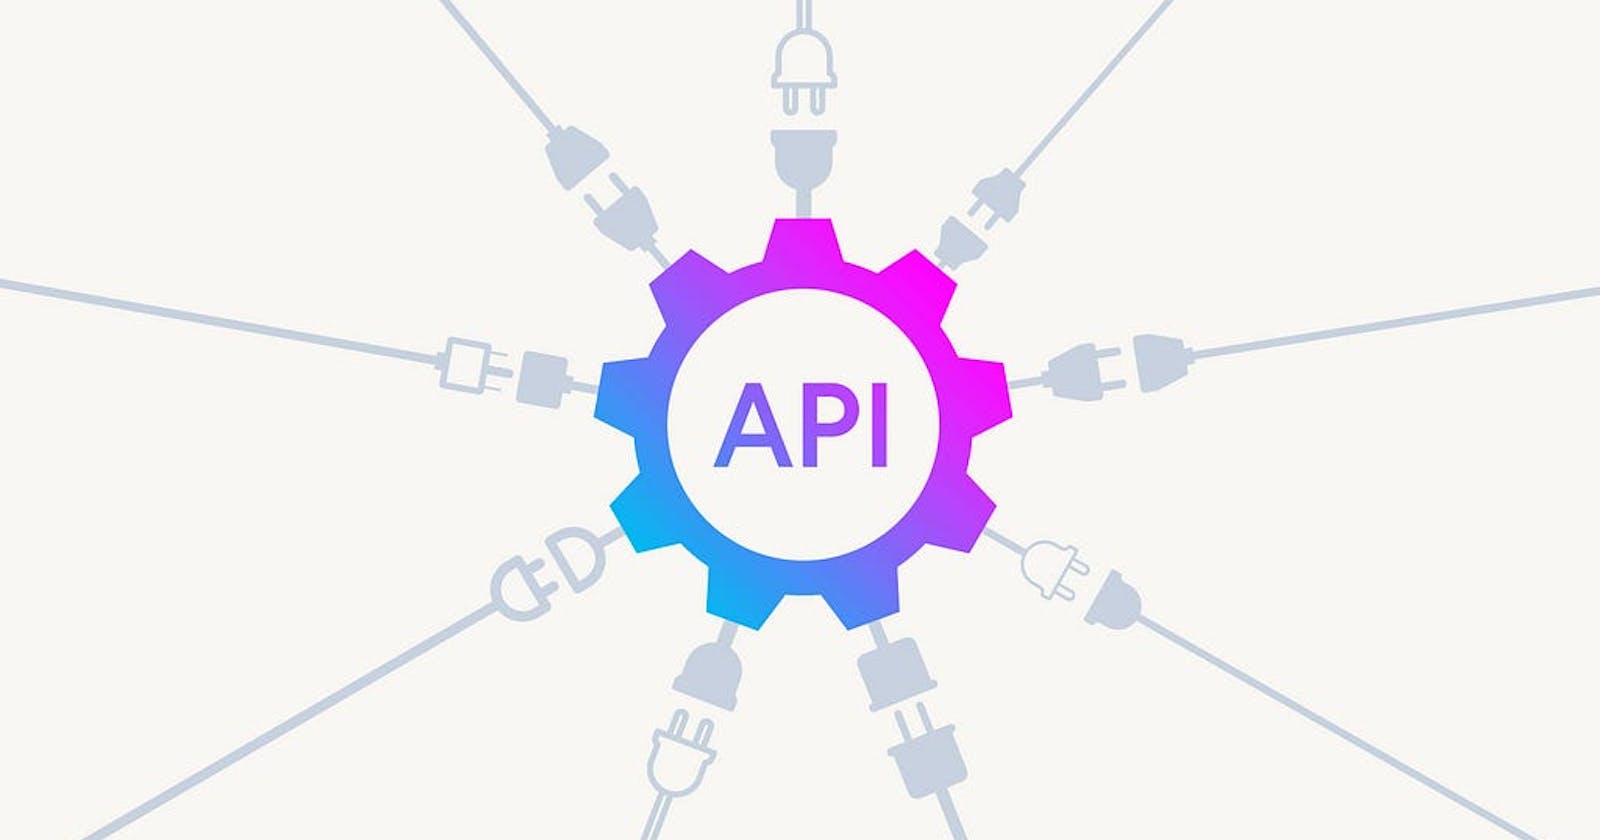 Ensure that you follow the best practices when designing your next API.